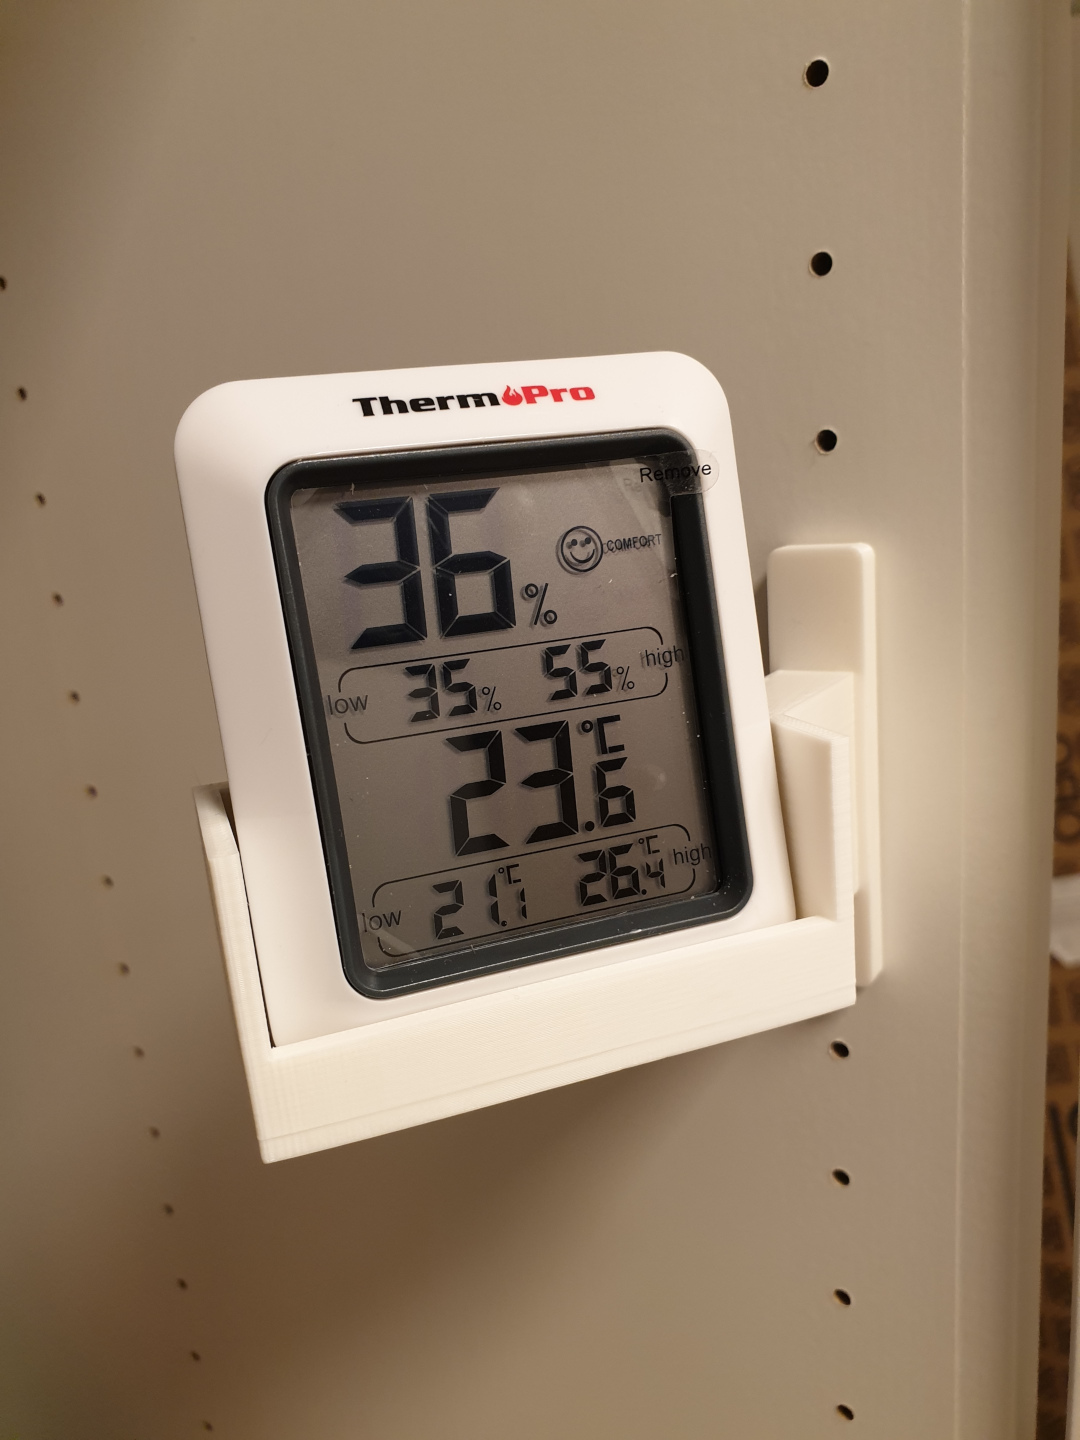 Thermometer Holder (ThermoPro TP50) for Non-damaging 3 pin base plate for usage in Ikea Platsa